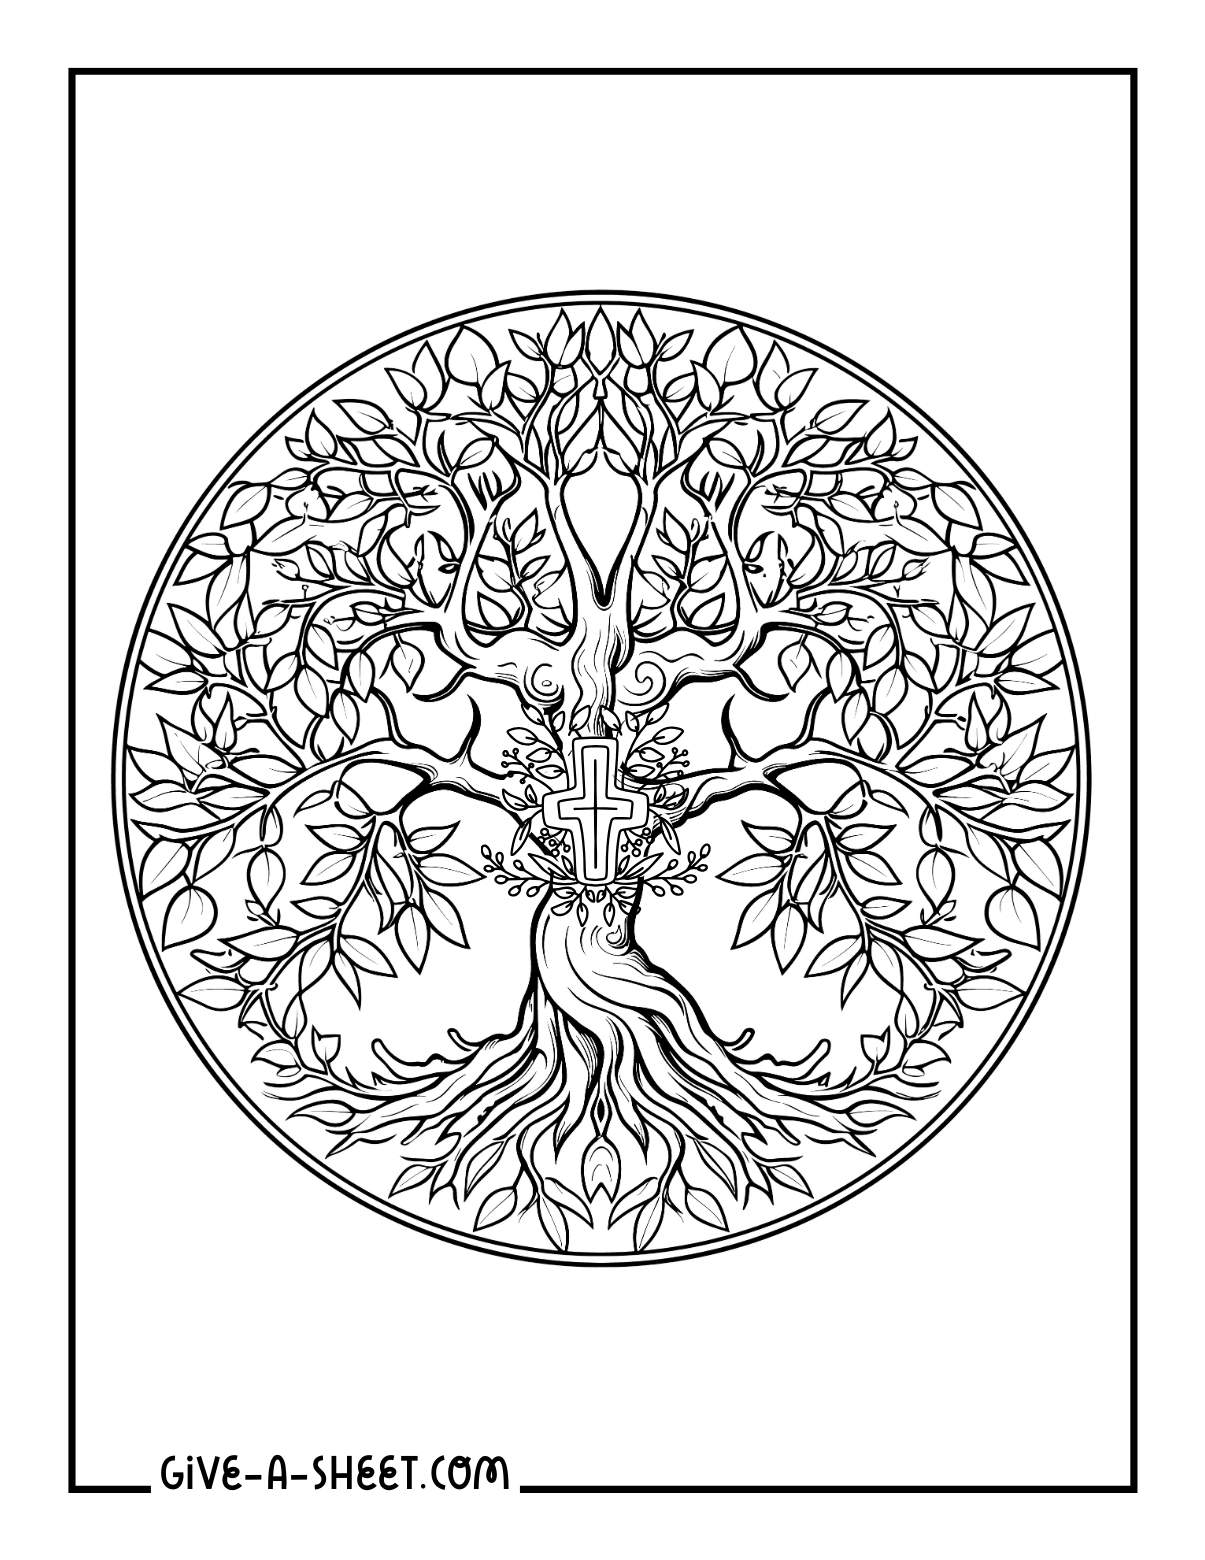 Christian Maple trees coloring page.